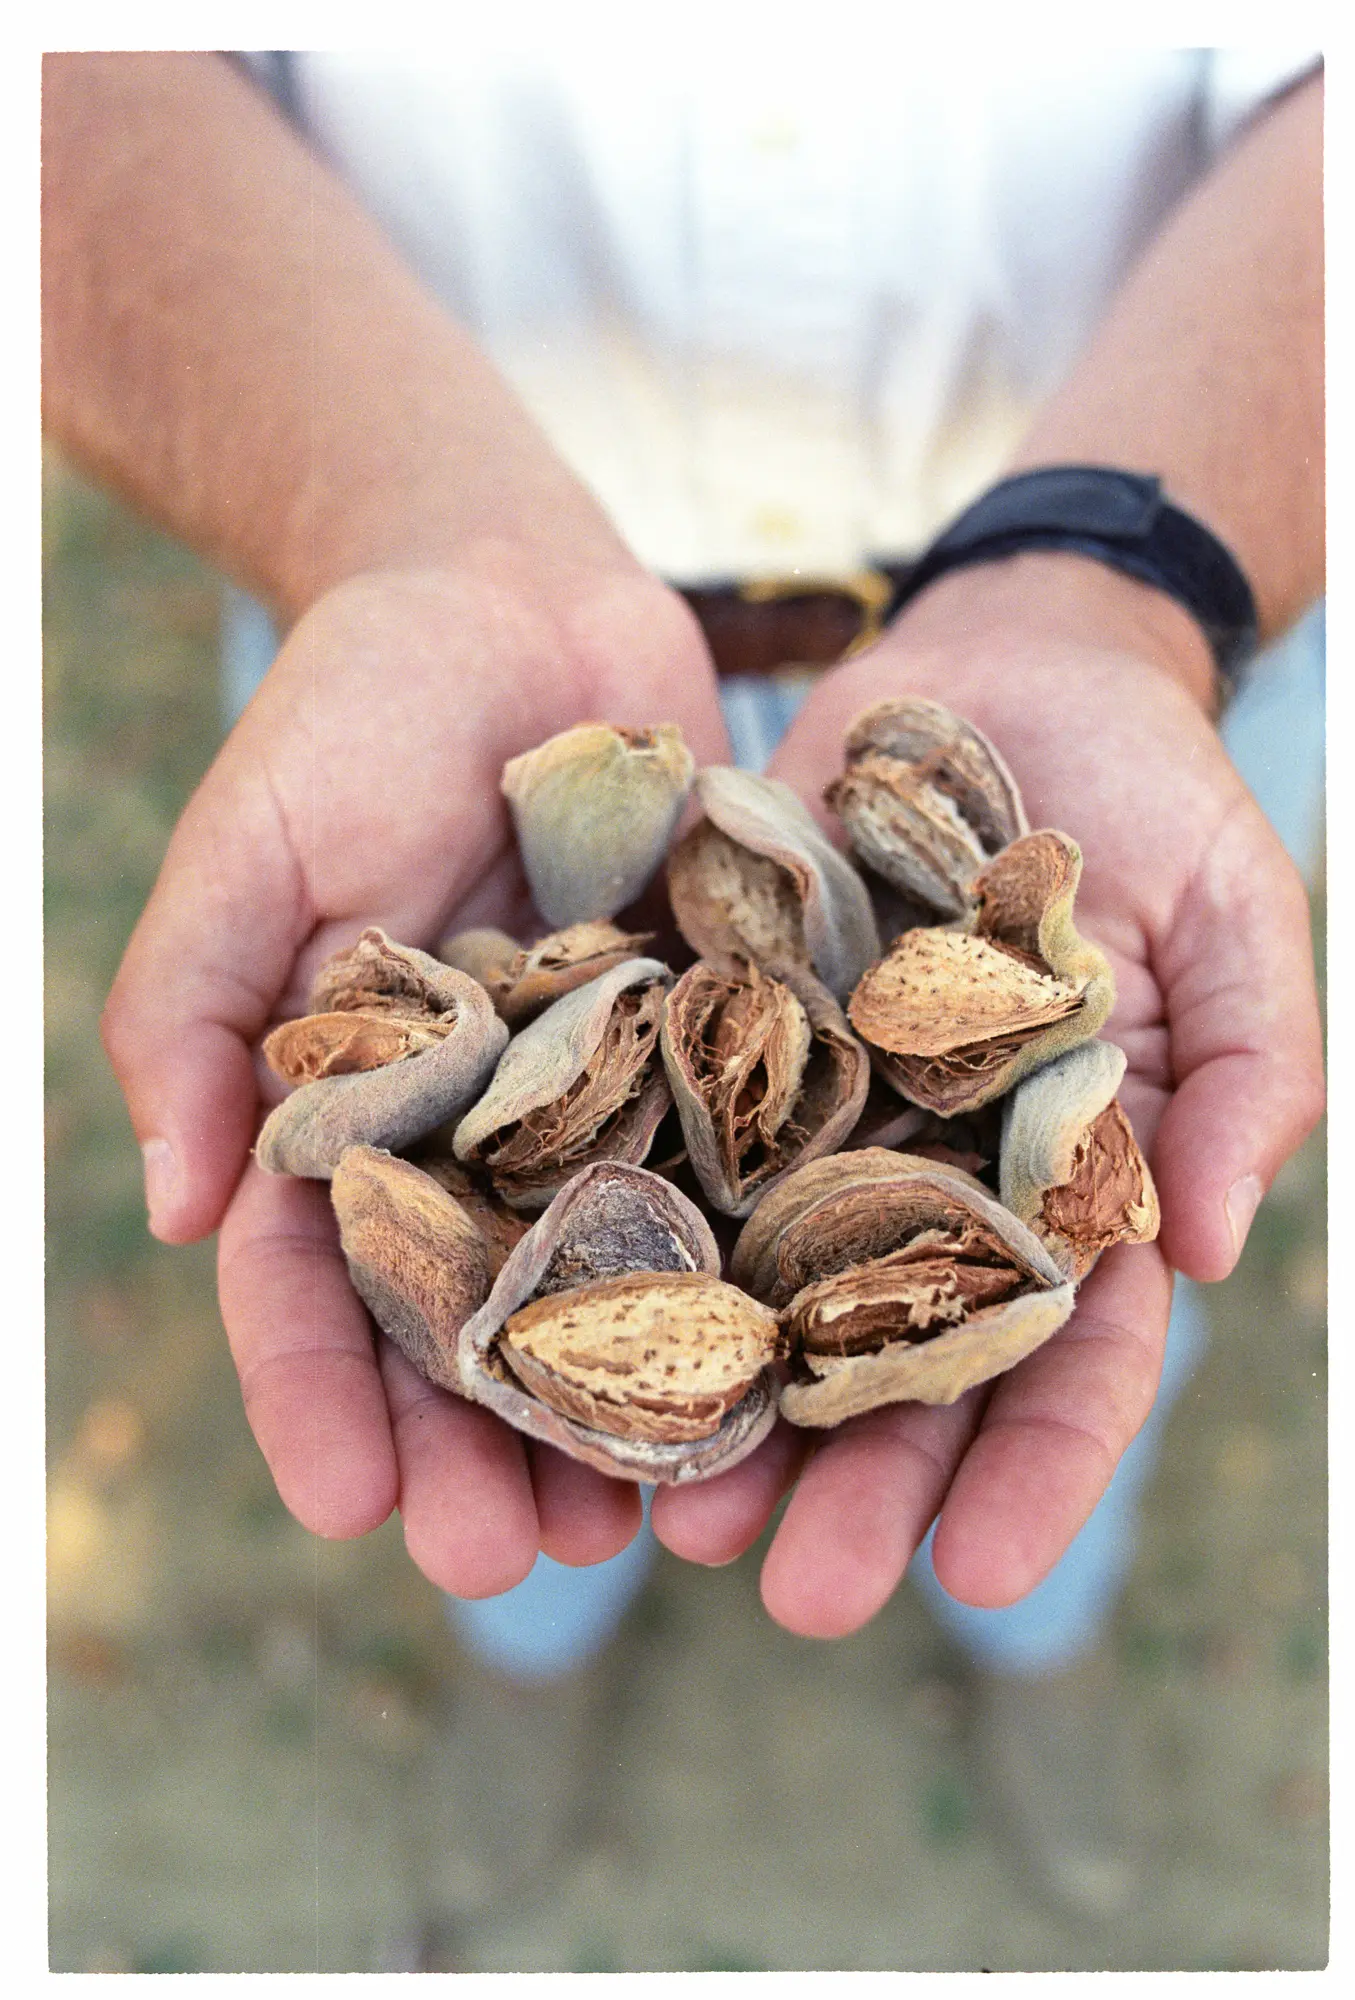 Almond farmer with hand full of almonds.